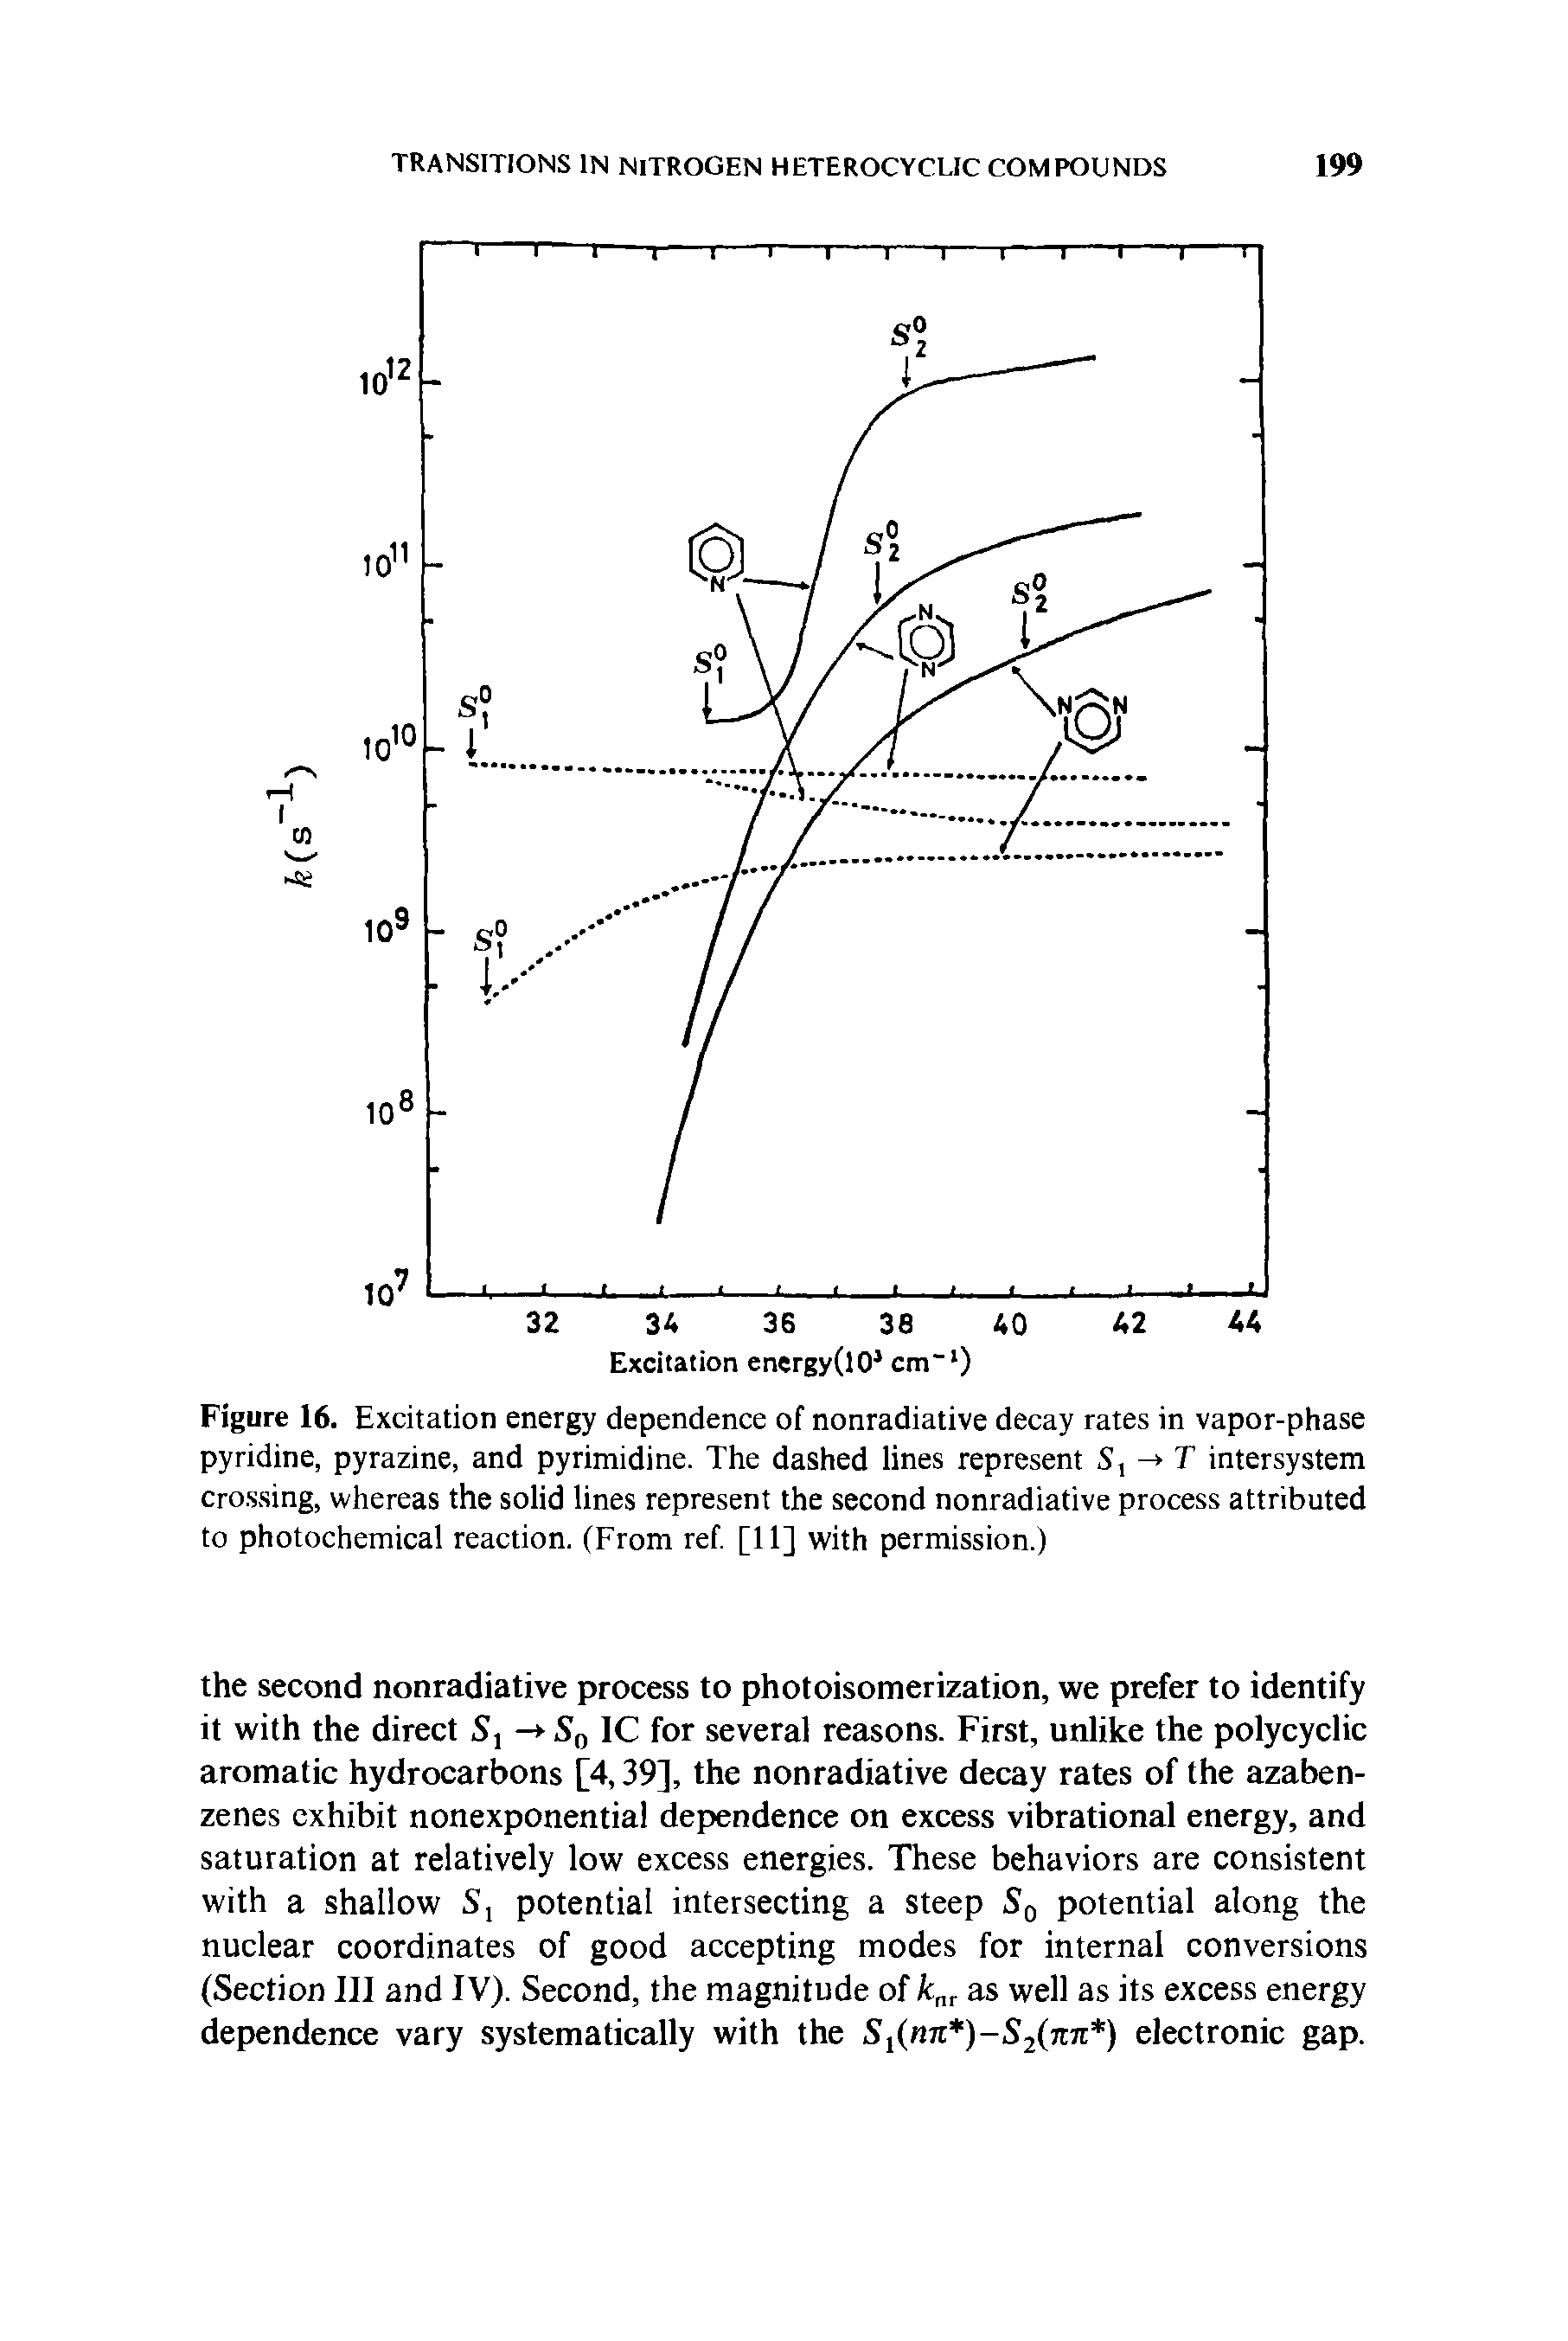 Figure 16. Excitation energy dependence of nonradiative decay rates in vapor-phase pyridine, pyrazine, and pyrimidine. The dashed lines represent S, - T intersystem crossing, whereas the solid lines represent the second nonradiative process attributed to photochemical reaction. (From ref. [11] with permission.)...